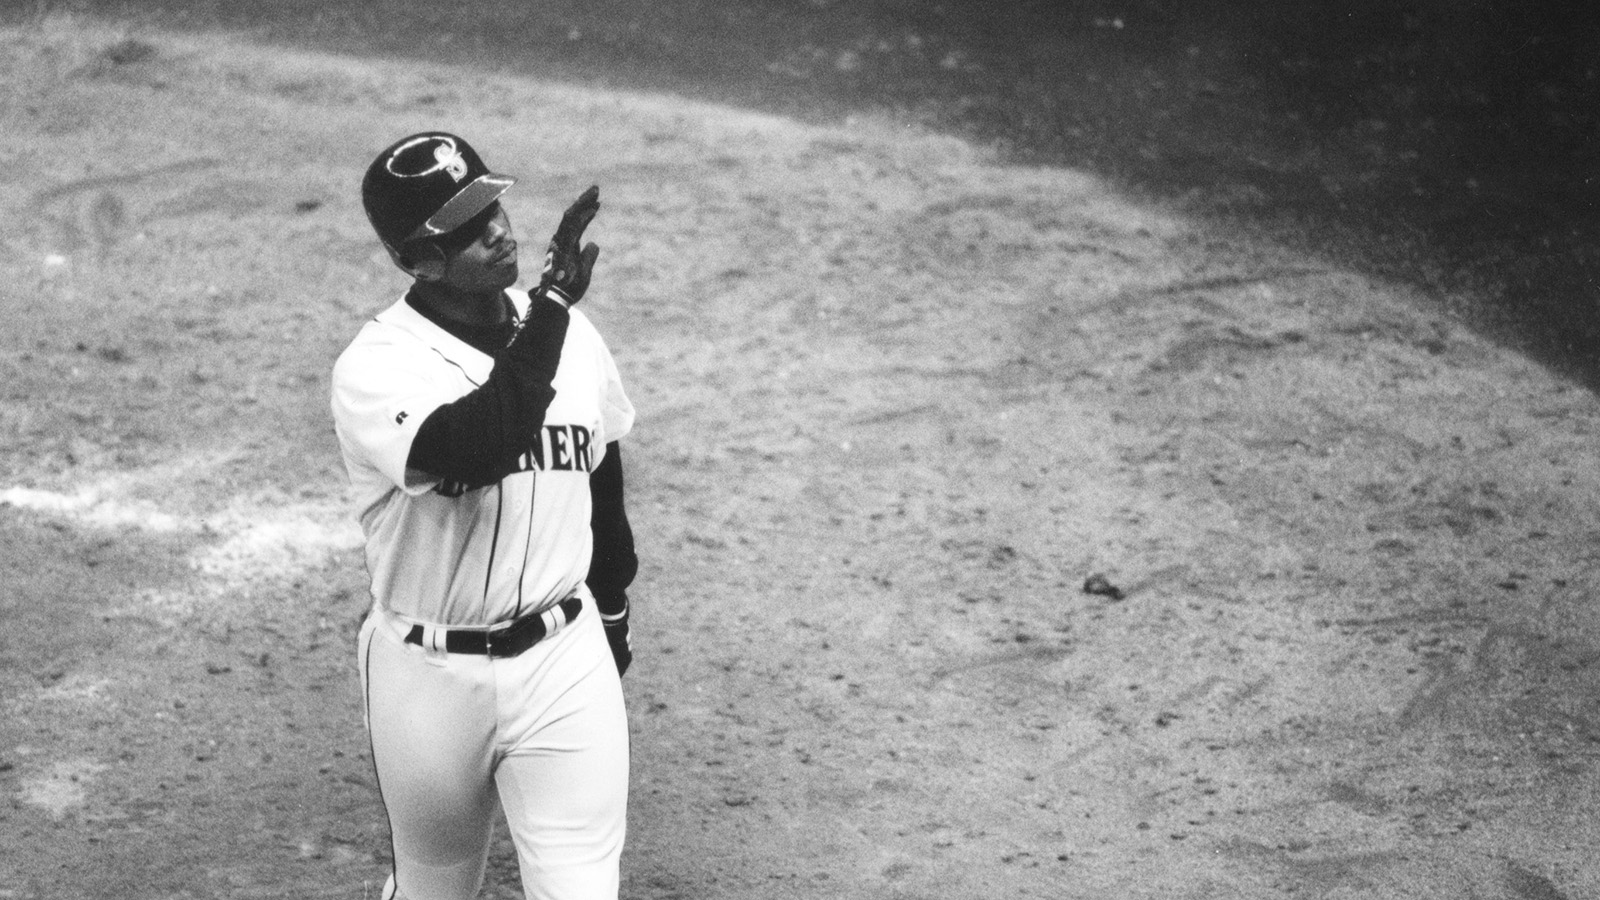 Ken Griffey Jr.'s MOST INSANE catches! The Kid was one of THE BEST